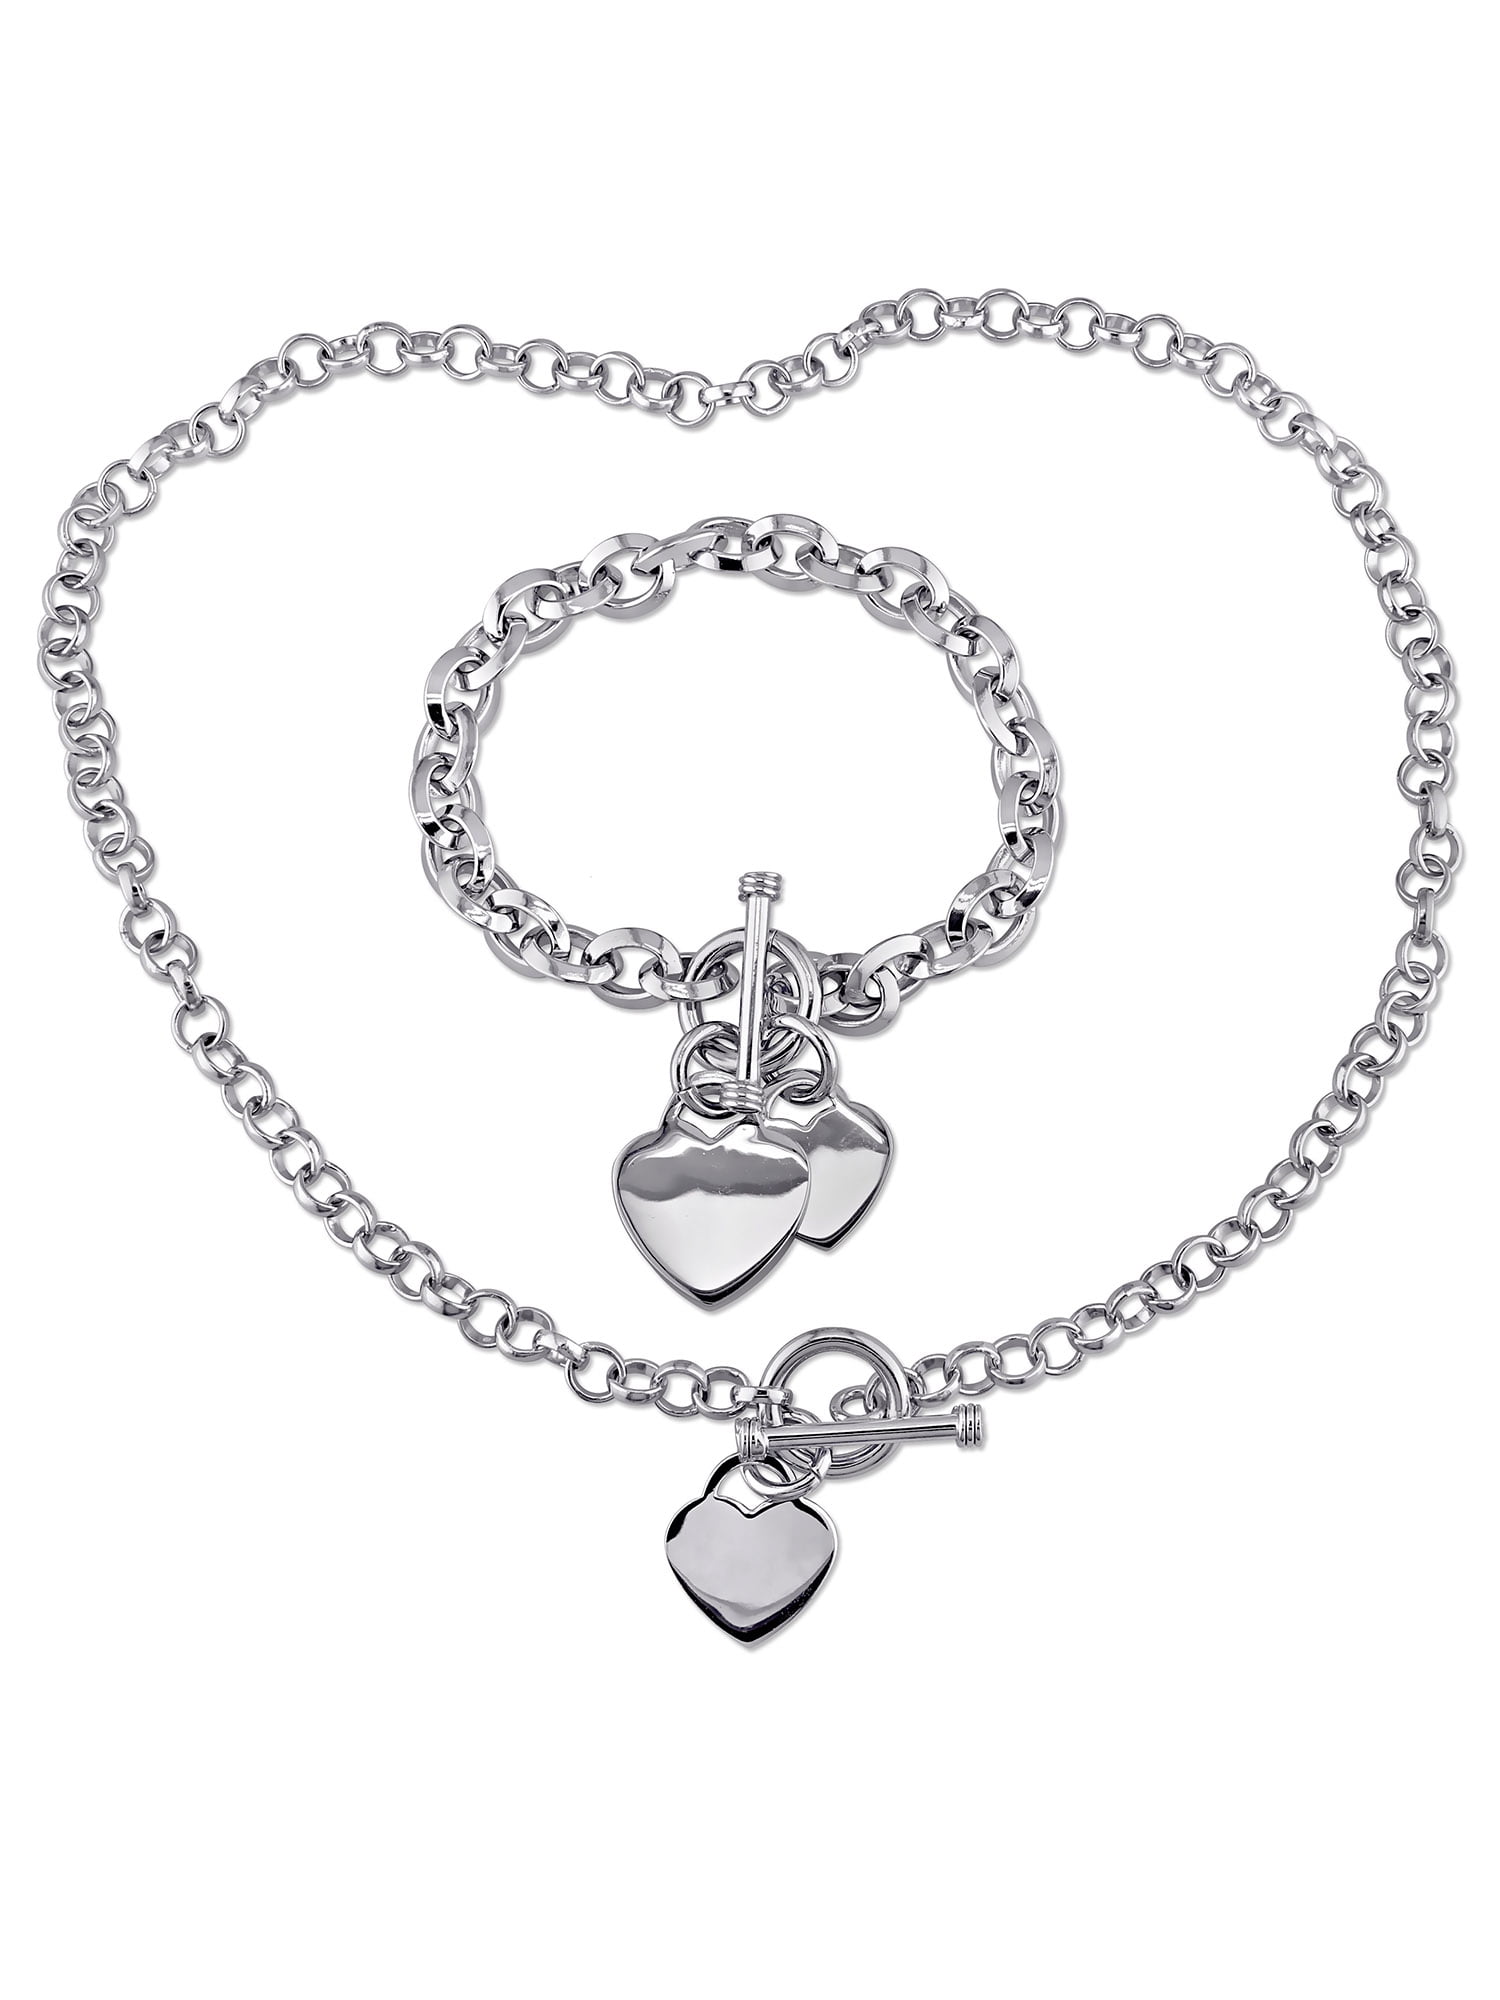 Sterling Silver Circle Link Heart Charm Bracelet and Necklace Set, 7.5, 18